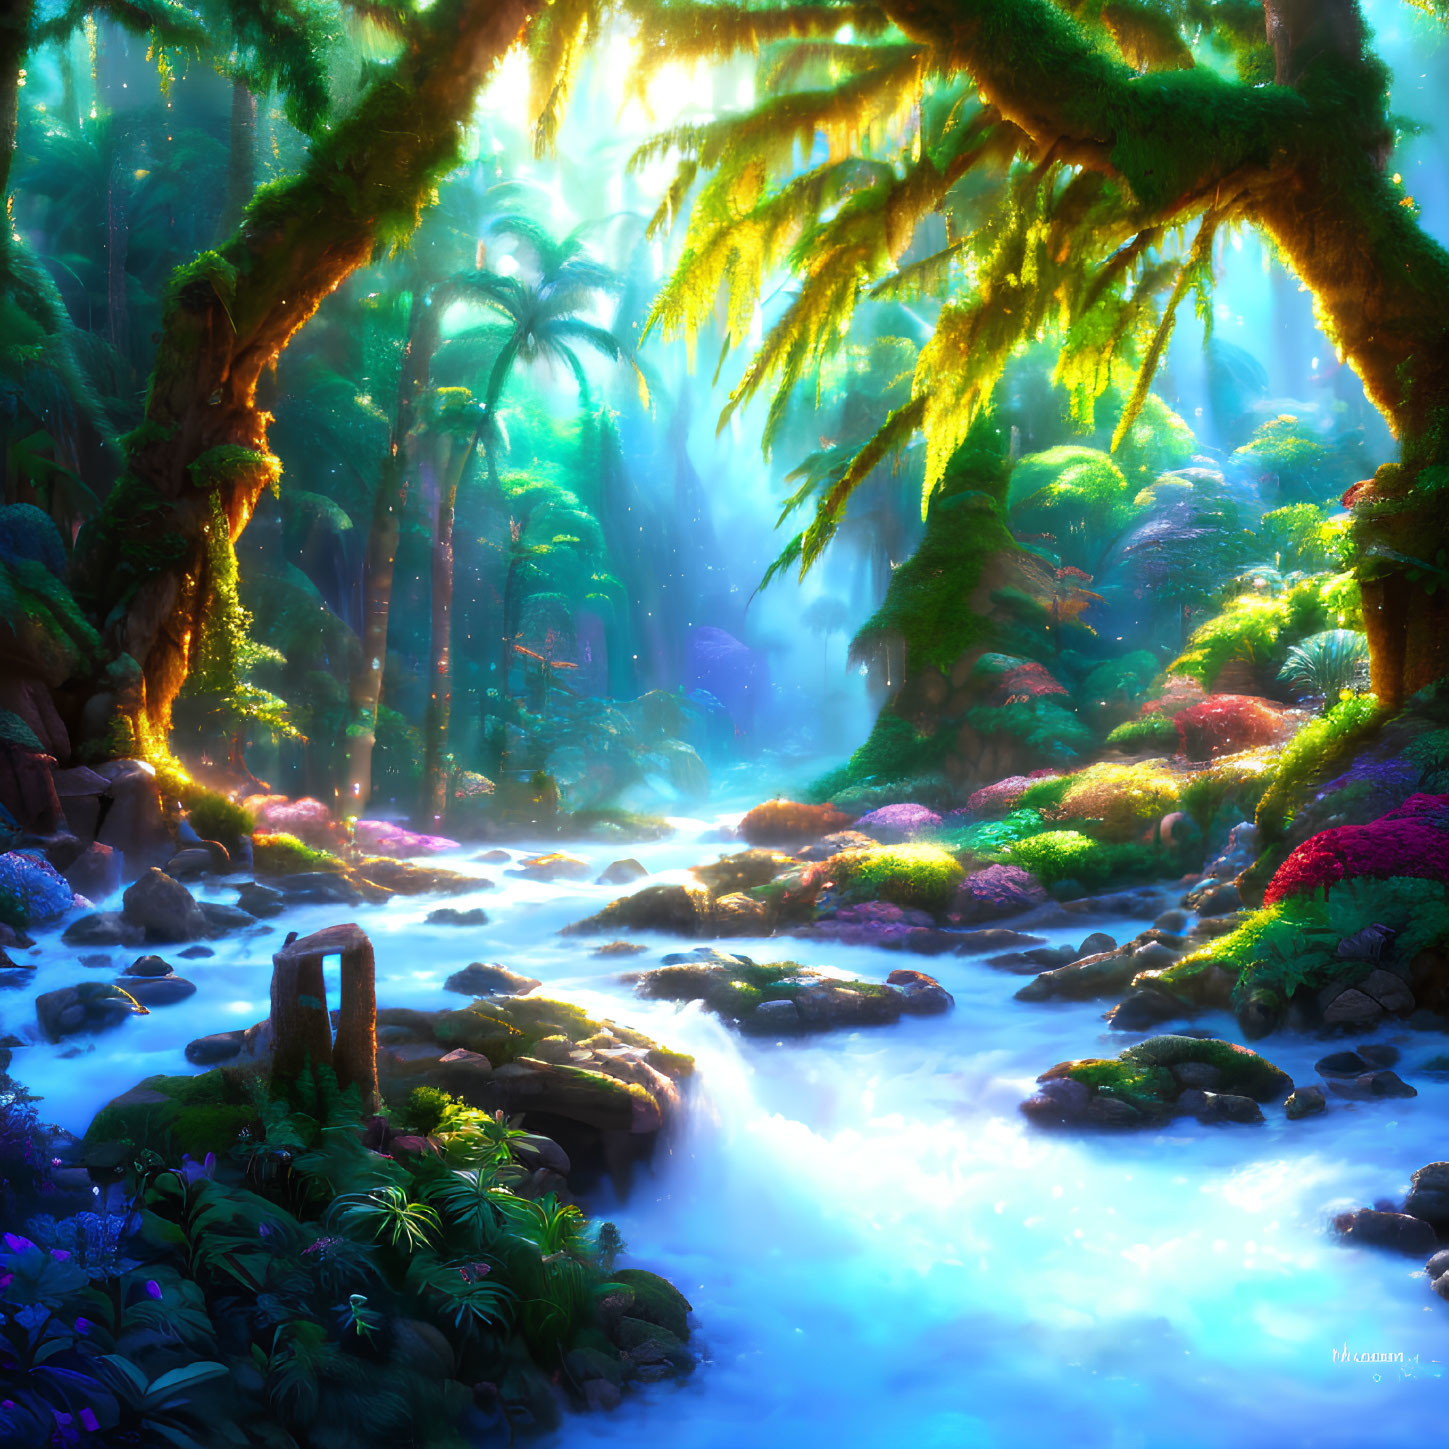 Lush greenery and misty river in enchanted forest scene